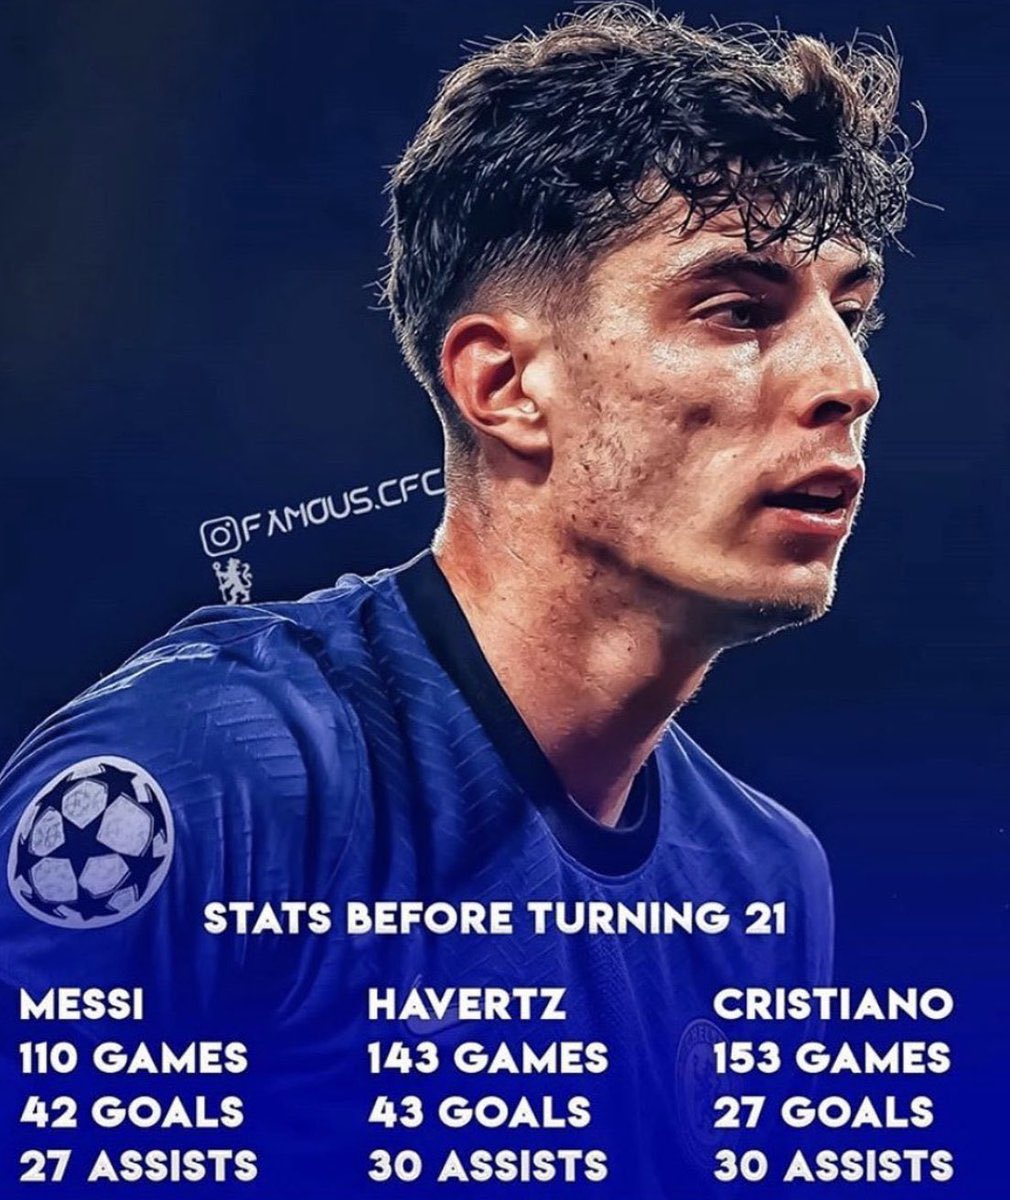 Firstly, everyone has seen this statistic comparing him to Messi/Ronaldo. I don’t think it’s right to put him in that category yet but be have to give him credit, regardless of league how many players manage that?